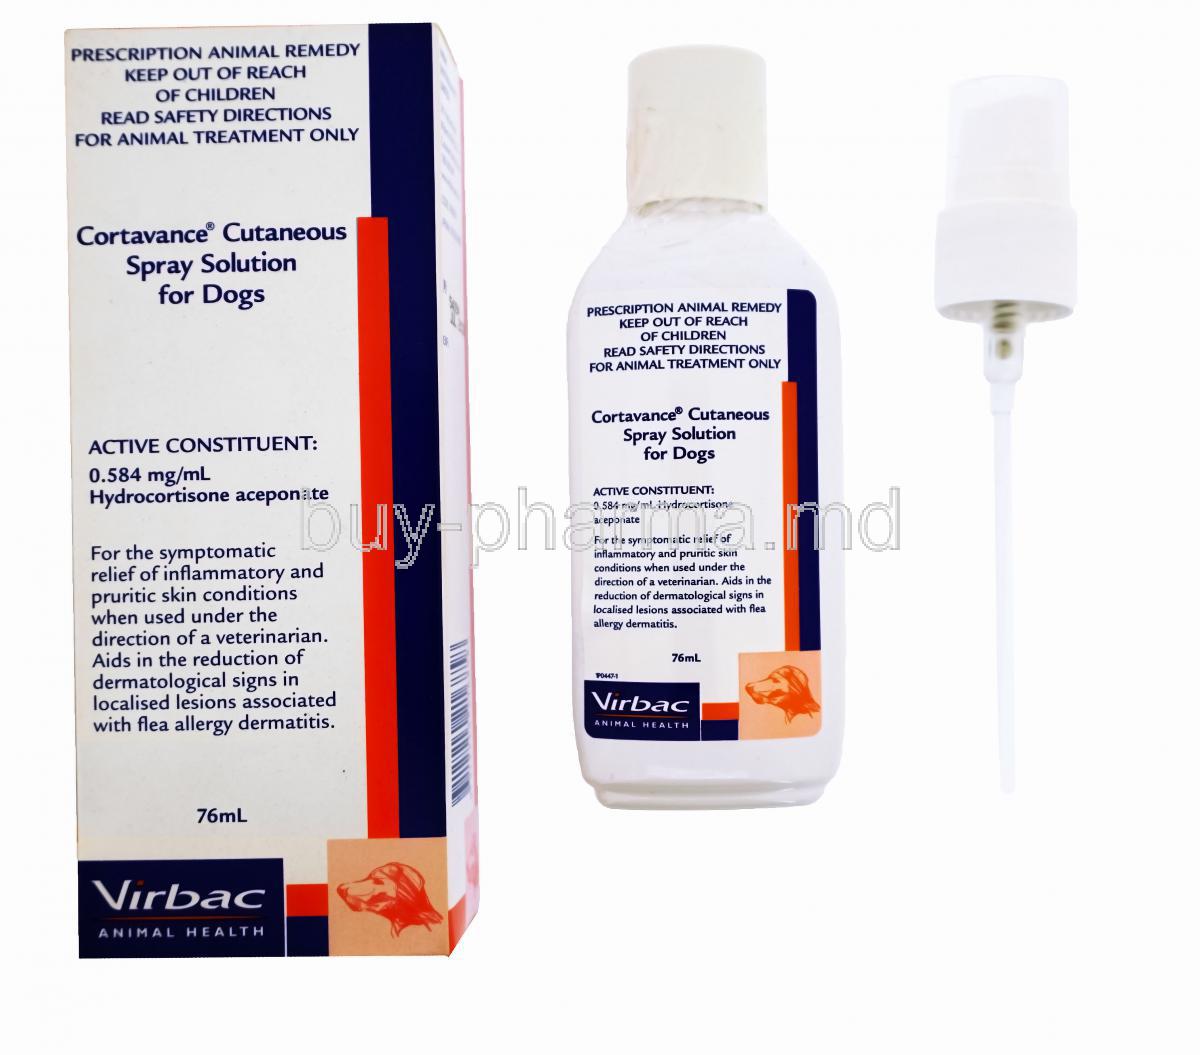 Cortavance Cutaneous Spray solution for dogs, 0.584mg/ml, 76ml, box and bottle front presentation with spray nozzle, warning instructions and use of product explanation